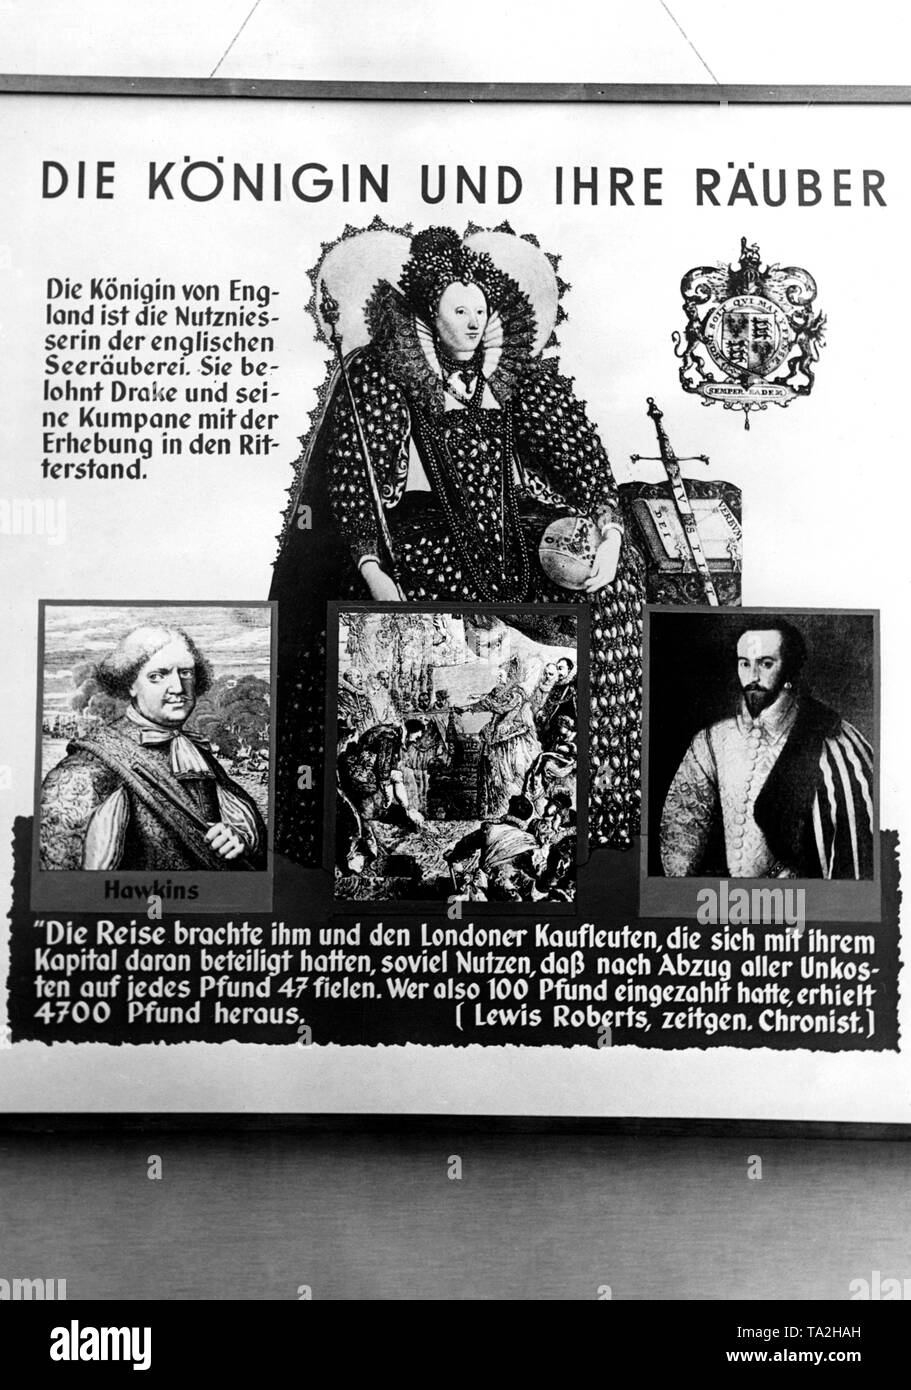 This anti-British propaganda exhibit of the exhibition 'Raubstaat England' was intended to defame the British through their history of controversial tactics in dealing with piracy. The poster with the title 'The Queen and her robbers' refers to Queen Elisabeth as the beneficiary of the freebootery. Stock Photo